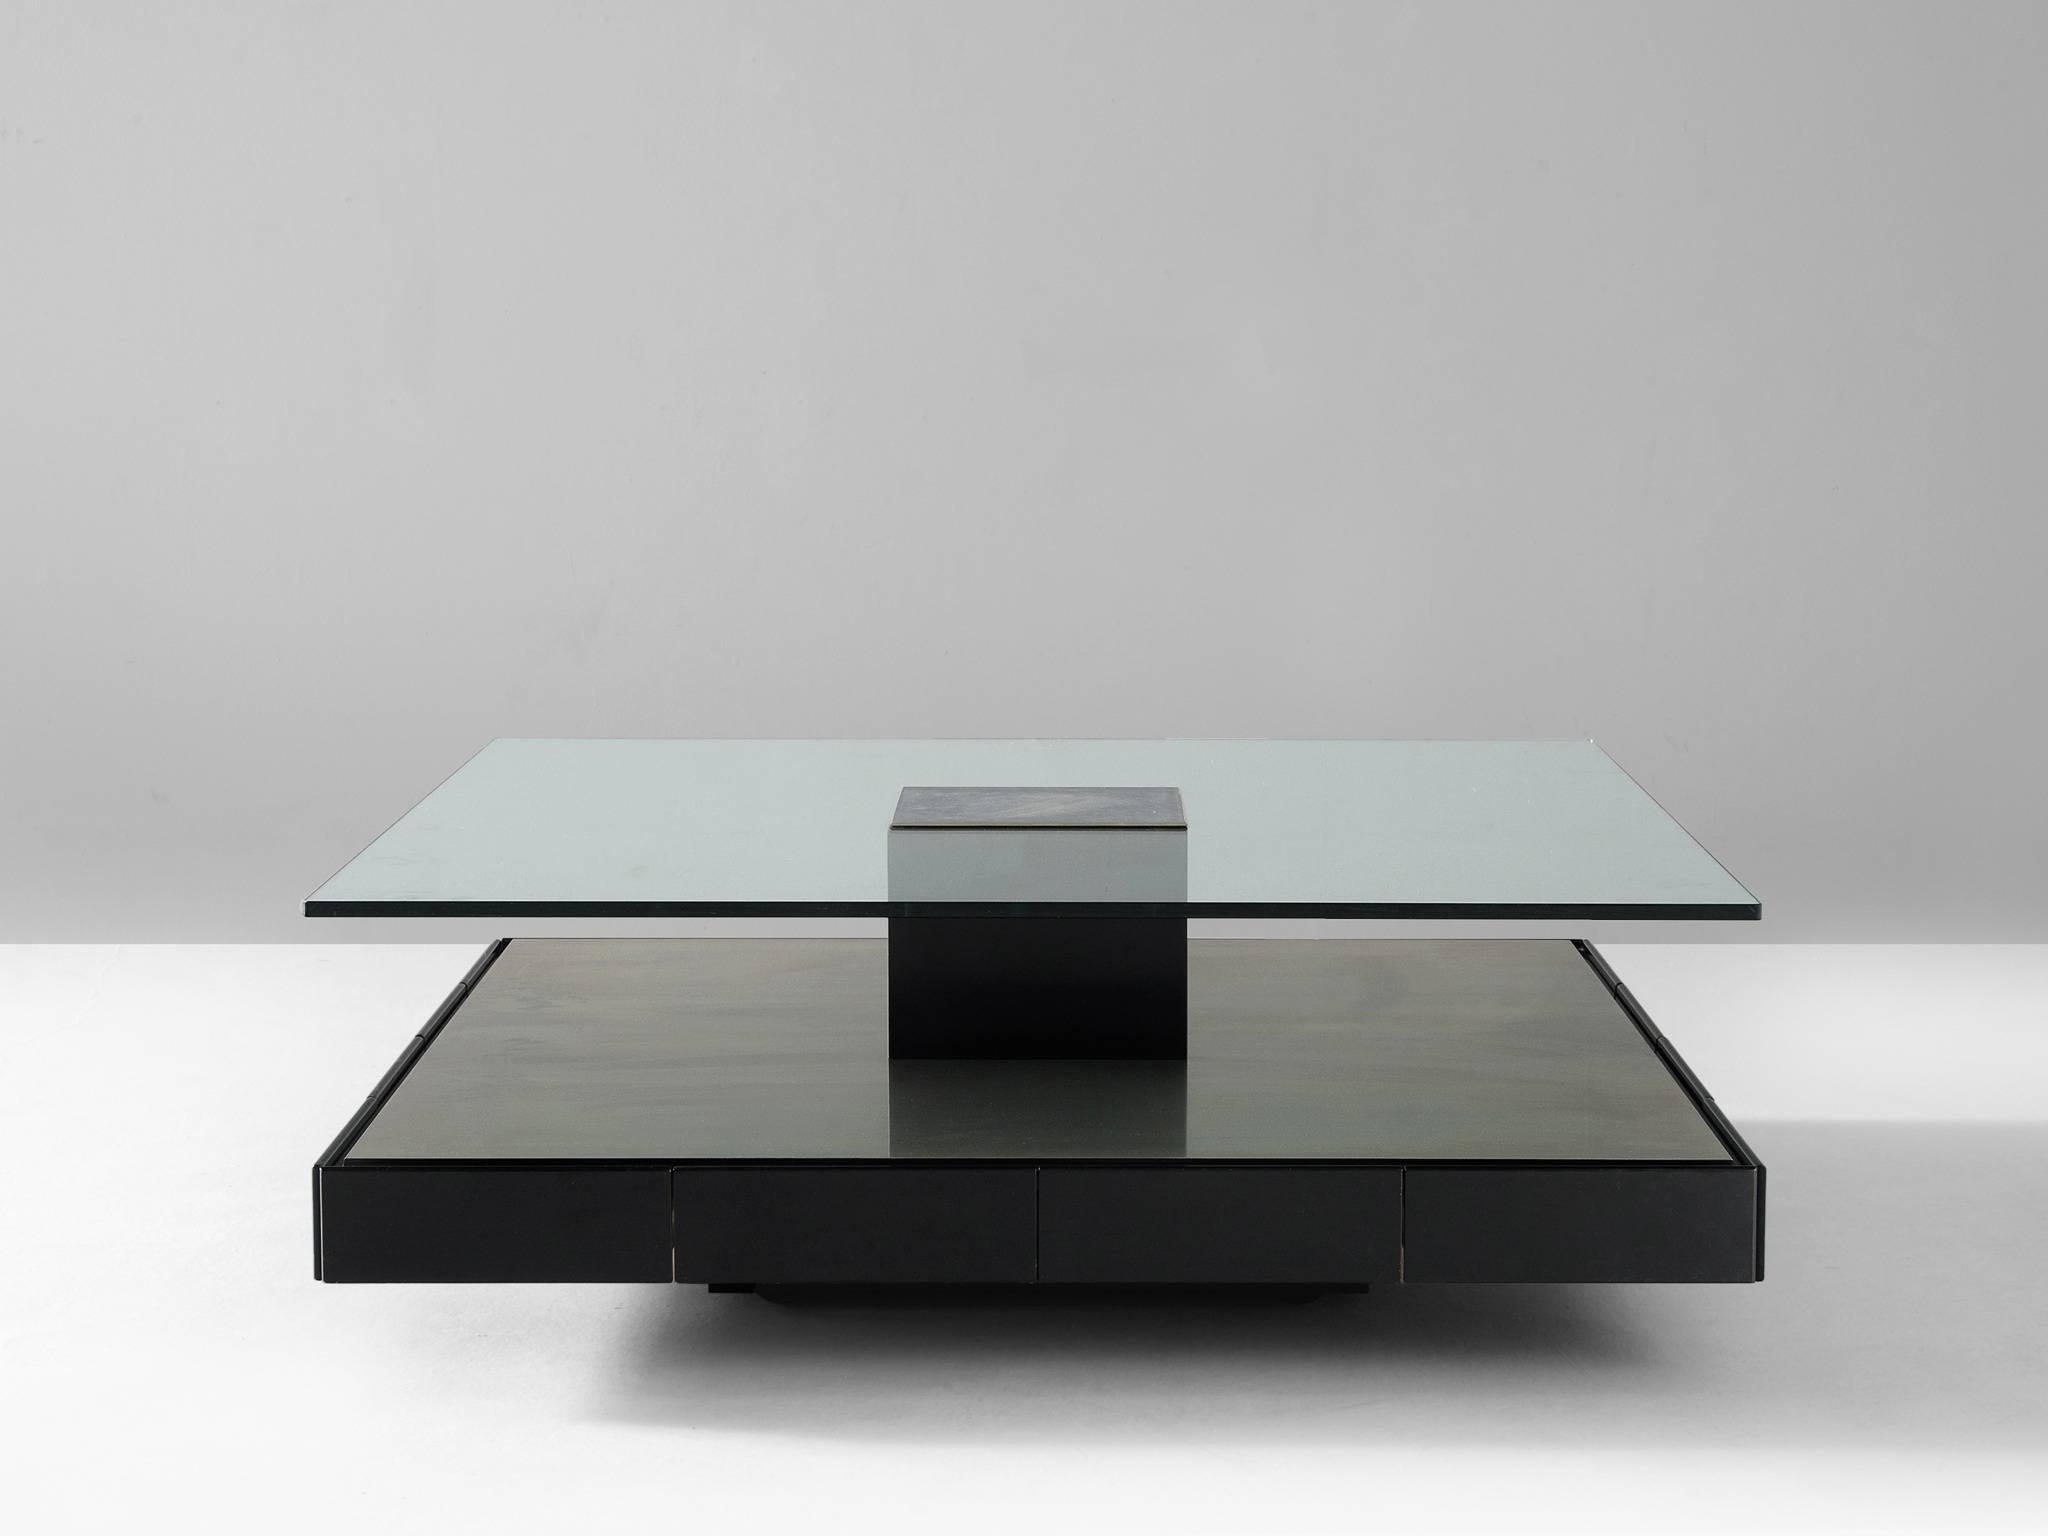 Coffee table model T147, in metal, wood and glass, by Marco Fantoni for Tecno, Italy, 1969.

Minimalistic cocktail table by Italian designer Marco Fantoni for Tecno, Milano. This large table with clean and modern design consist of a raised base in